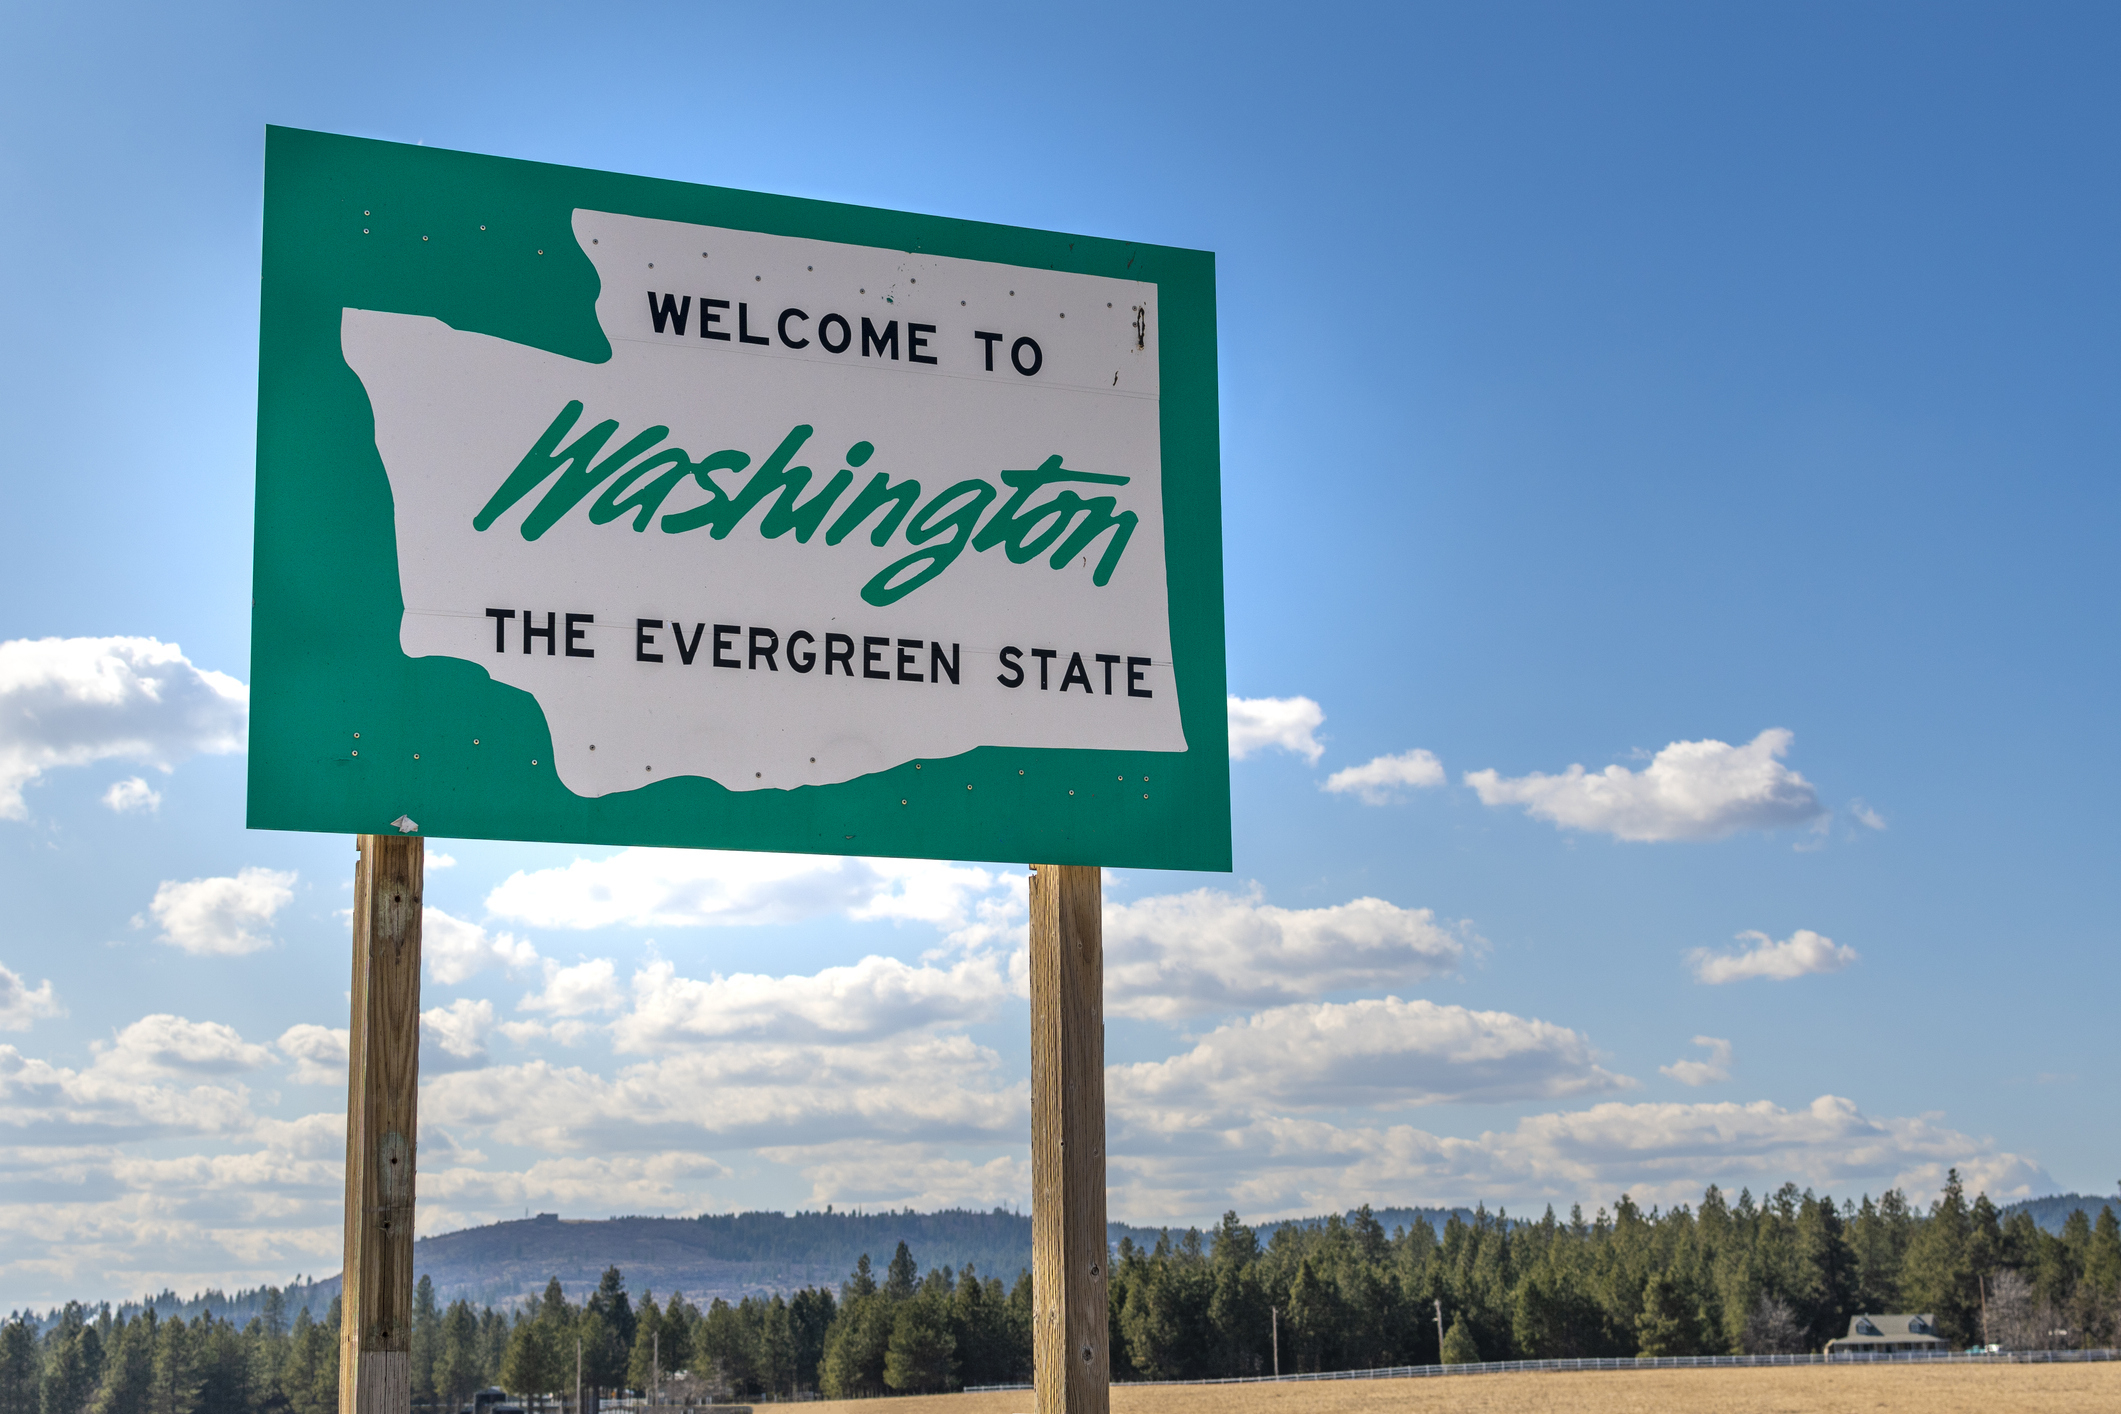 A large roadside sign reads &quot;Welcome to Washington, The Evergreen State&quot; against a backdrop of a clear sky and forested landscape